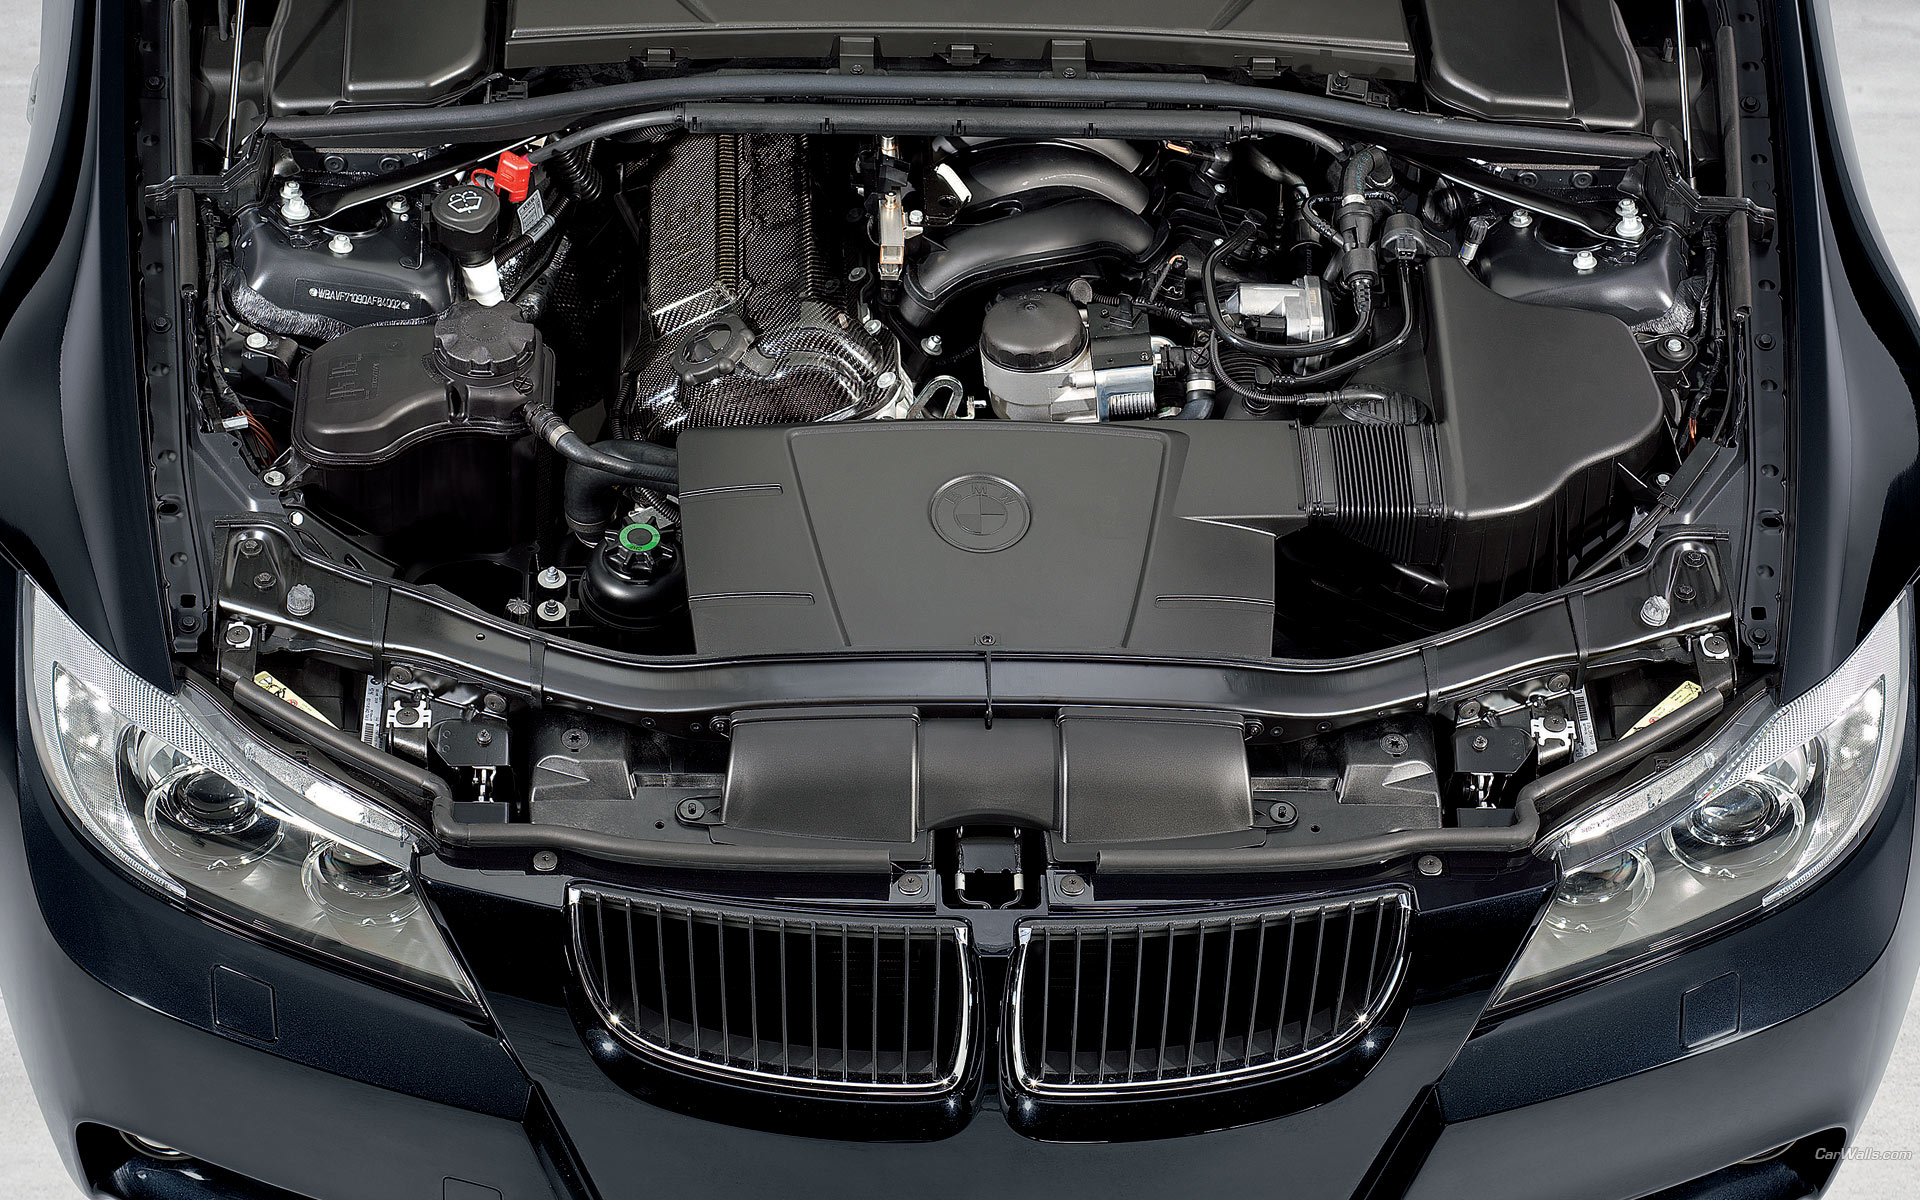 Download full size 320si engine Bmw wallpaper / 1920x1200